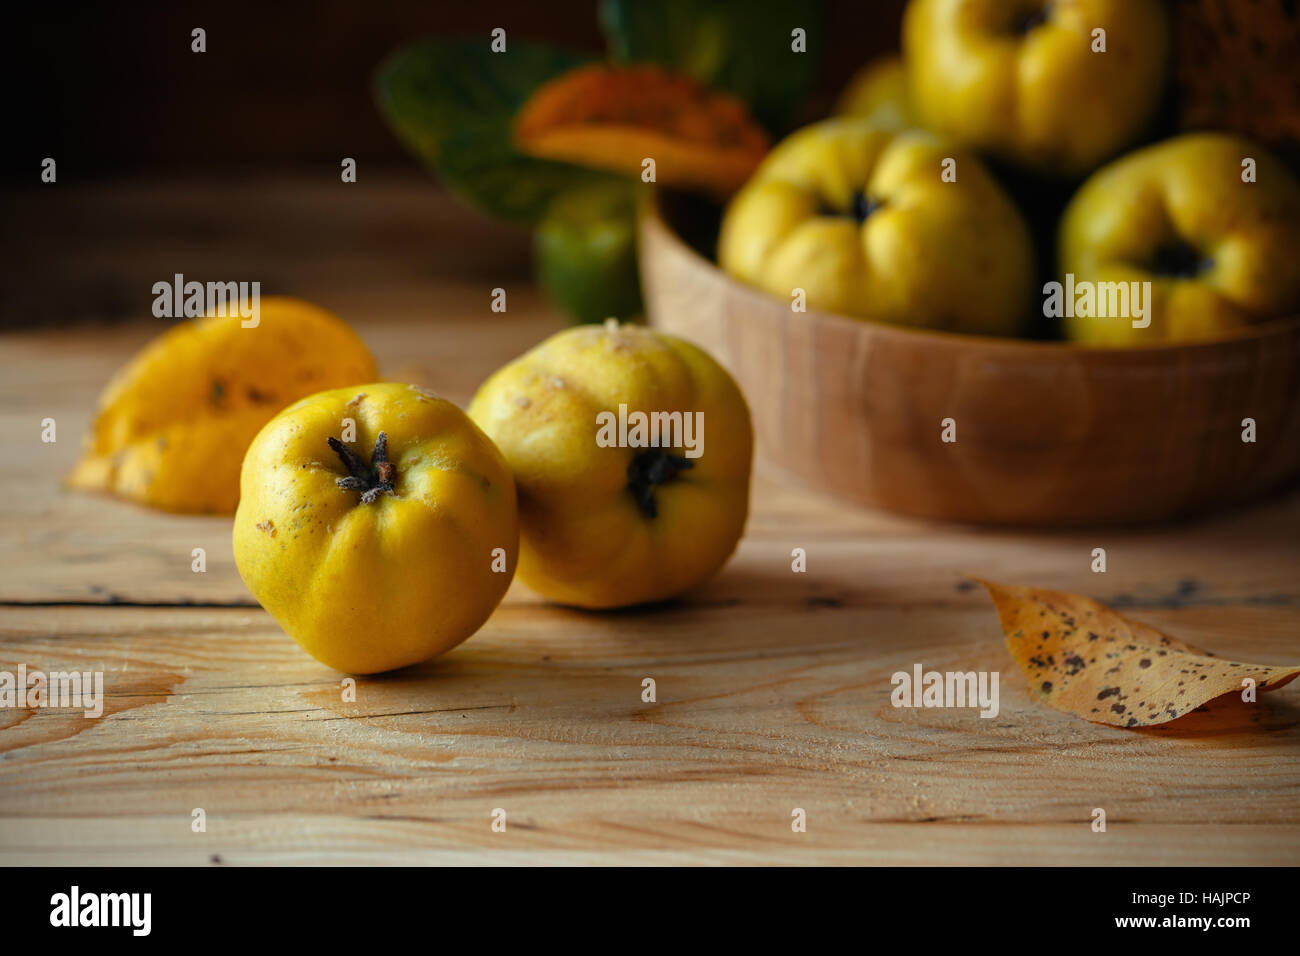 An autumn still life with quinces on wooden table Stock Photo